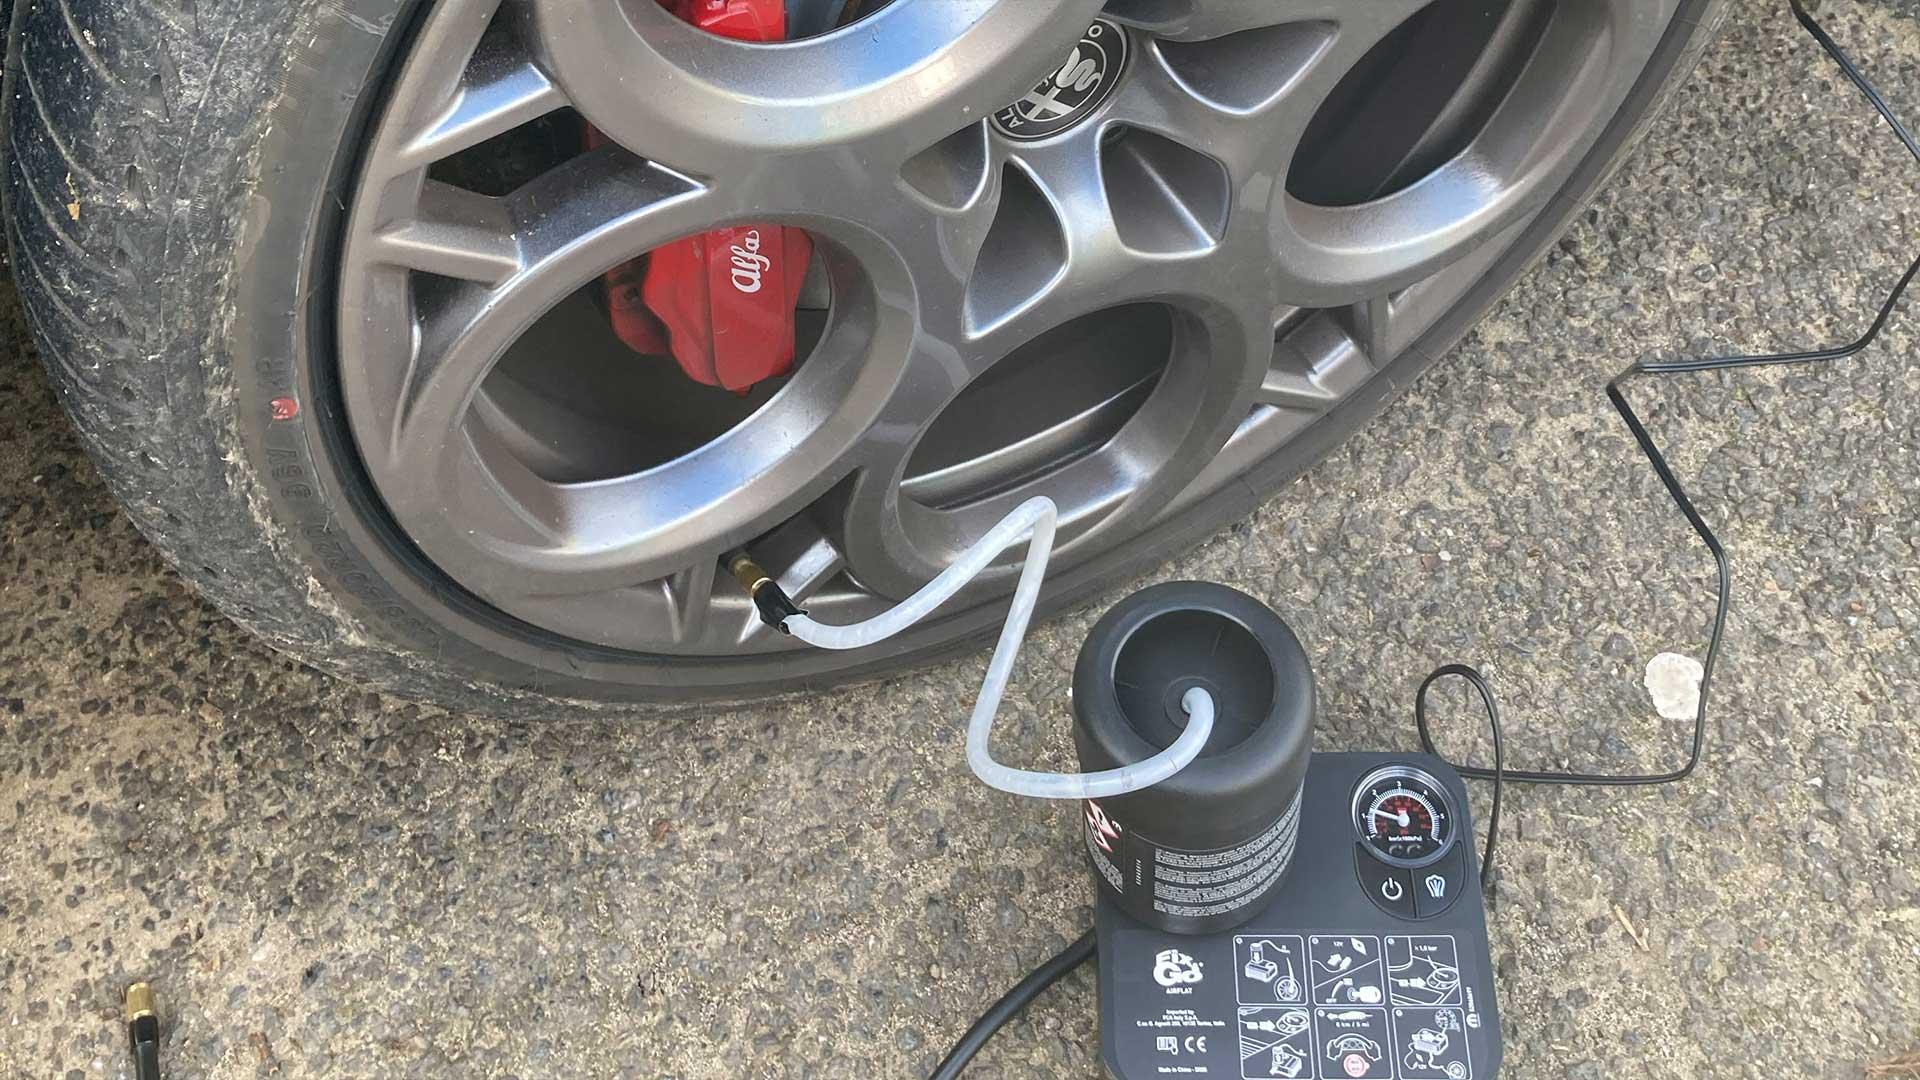 Repair kit for a flat tire in the back of a car